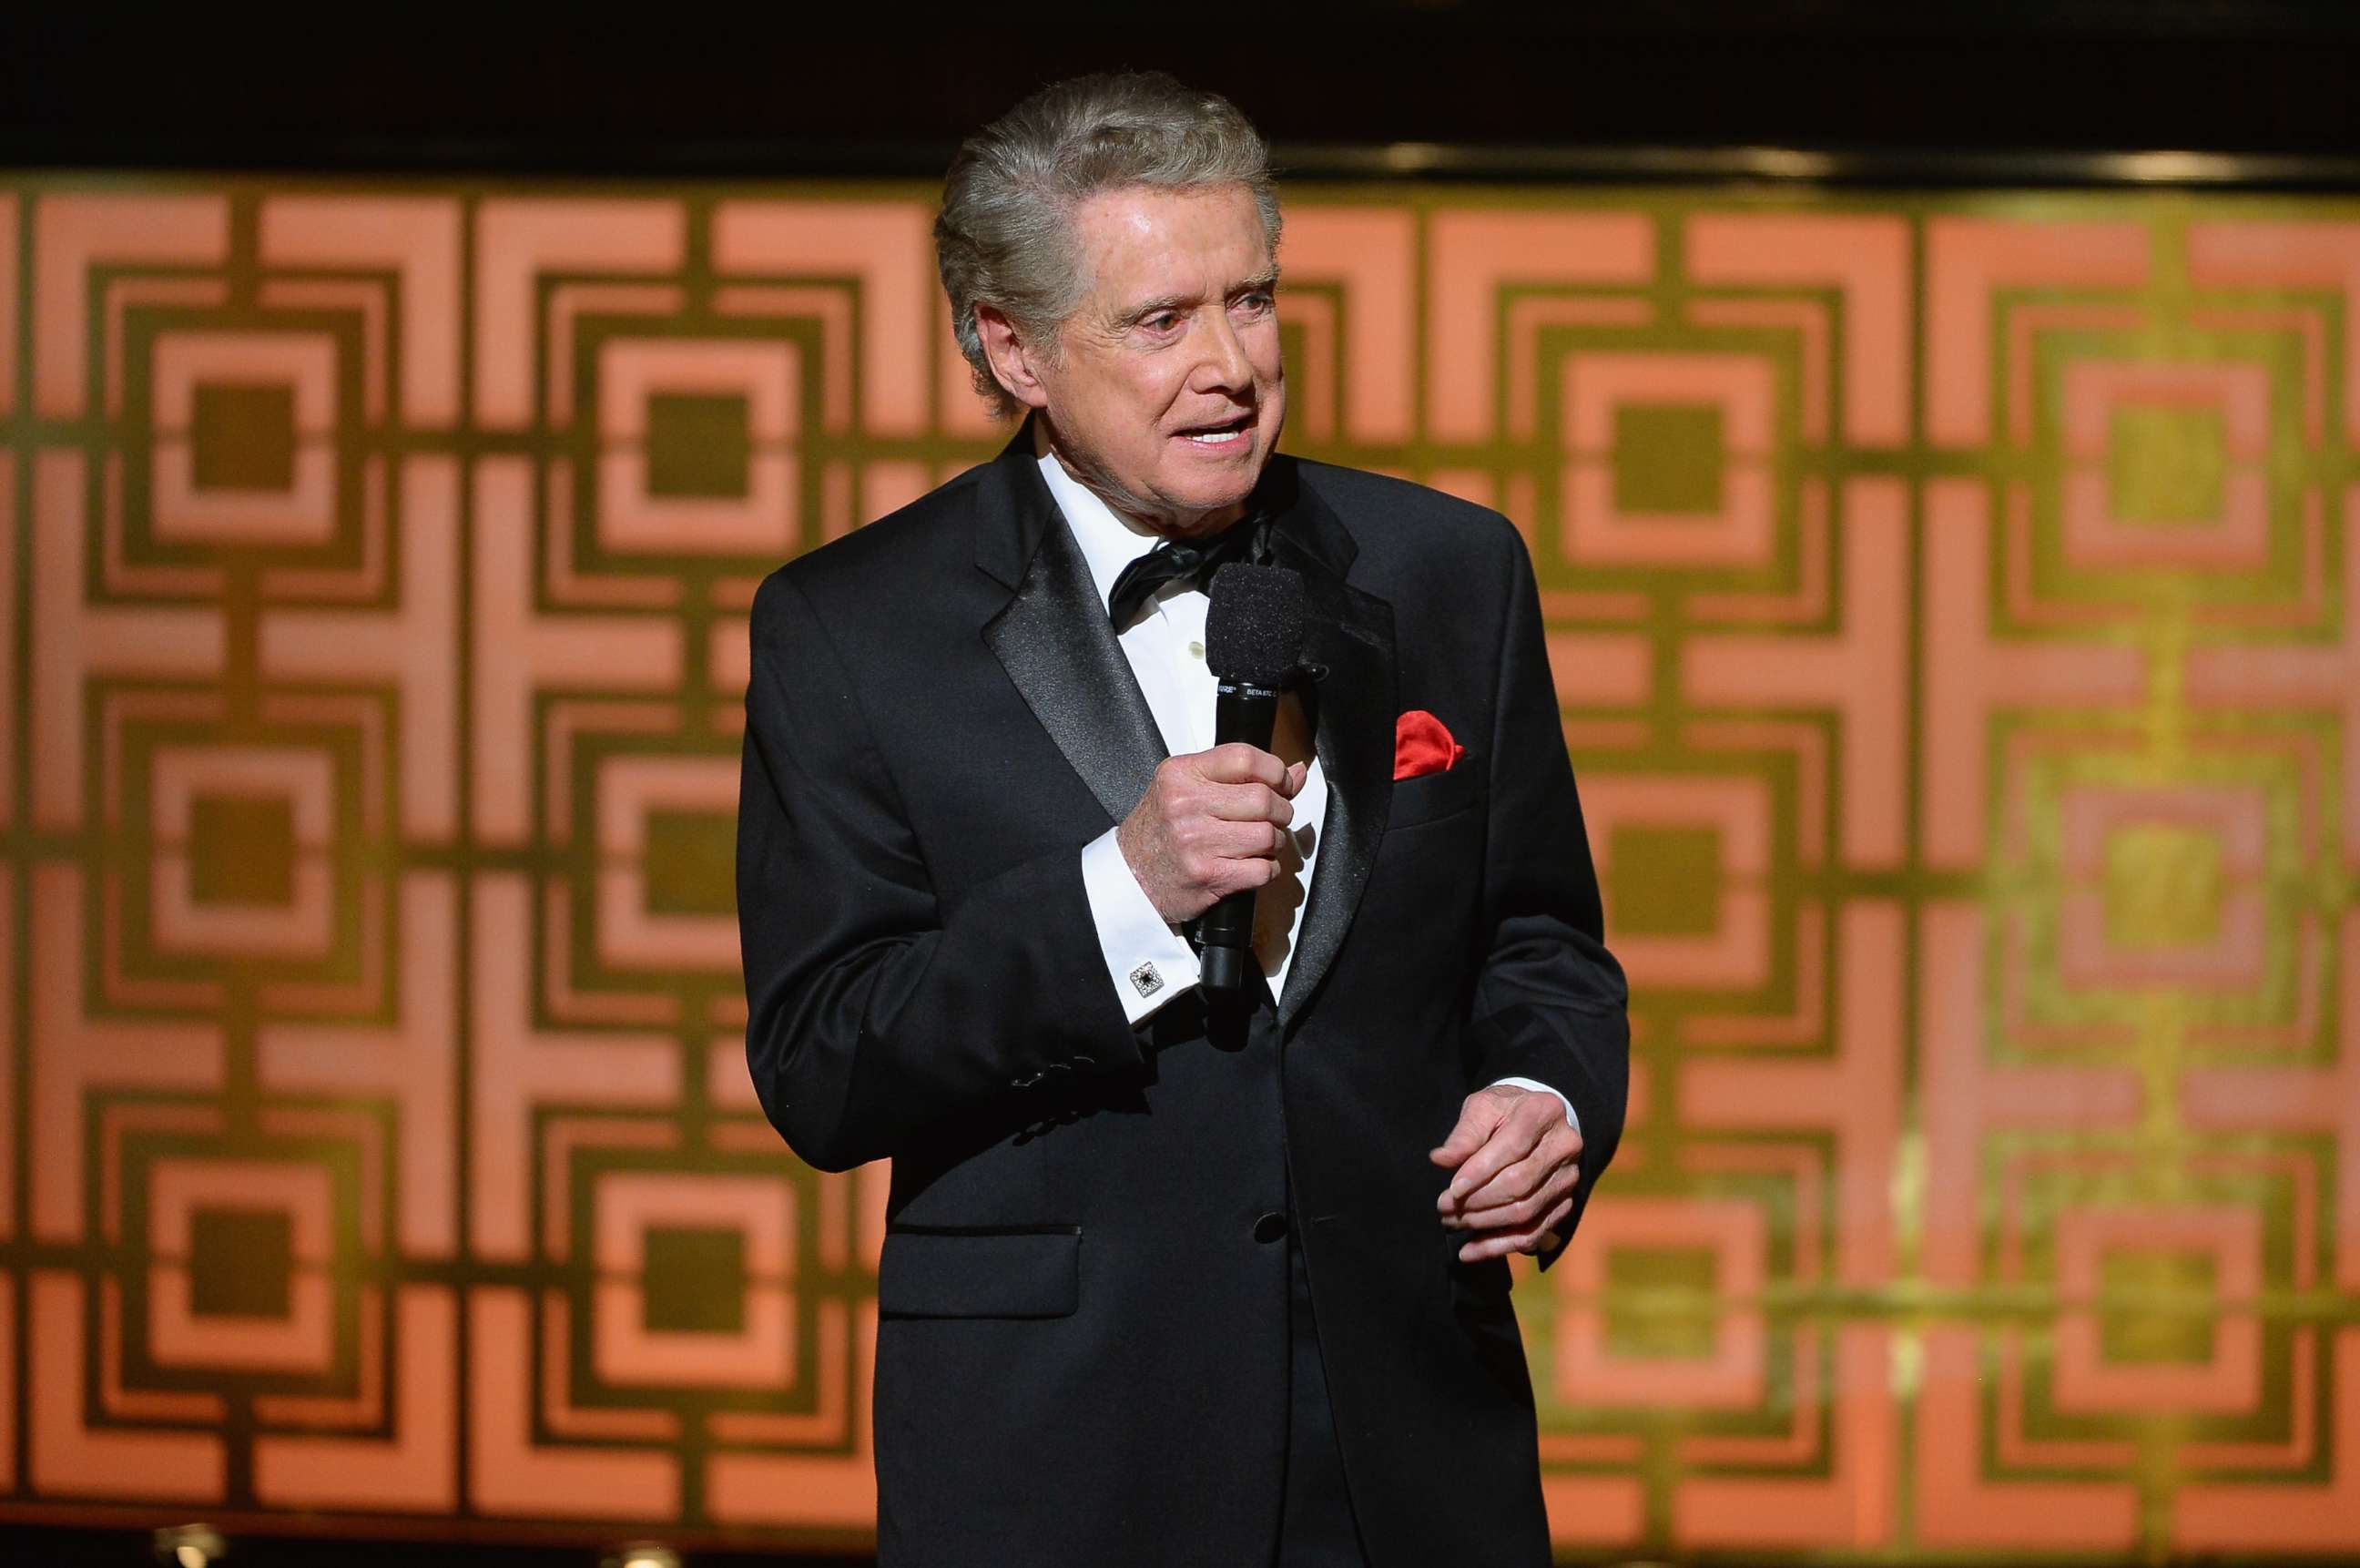 PHOTO: Regis Philbin speaks onstage at Spike TV's "Don Rickles: One Night Only" on May 6, 2014, in New York City.